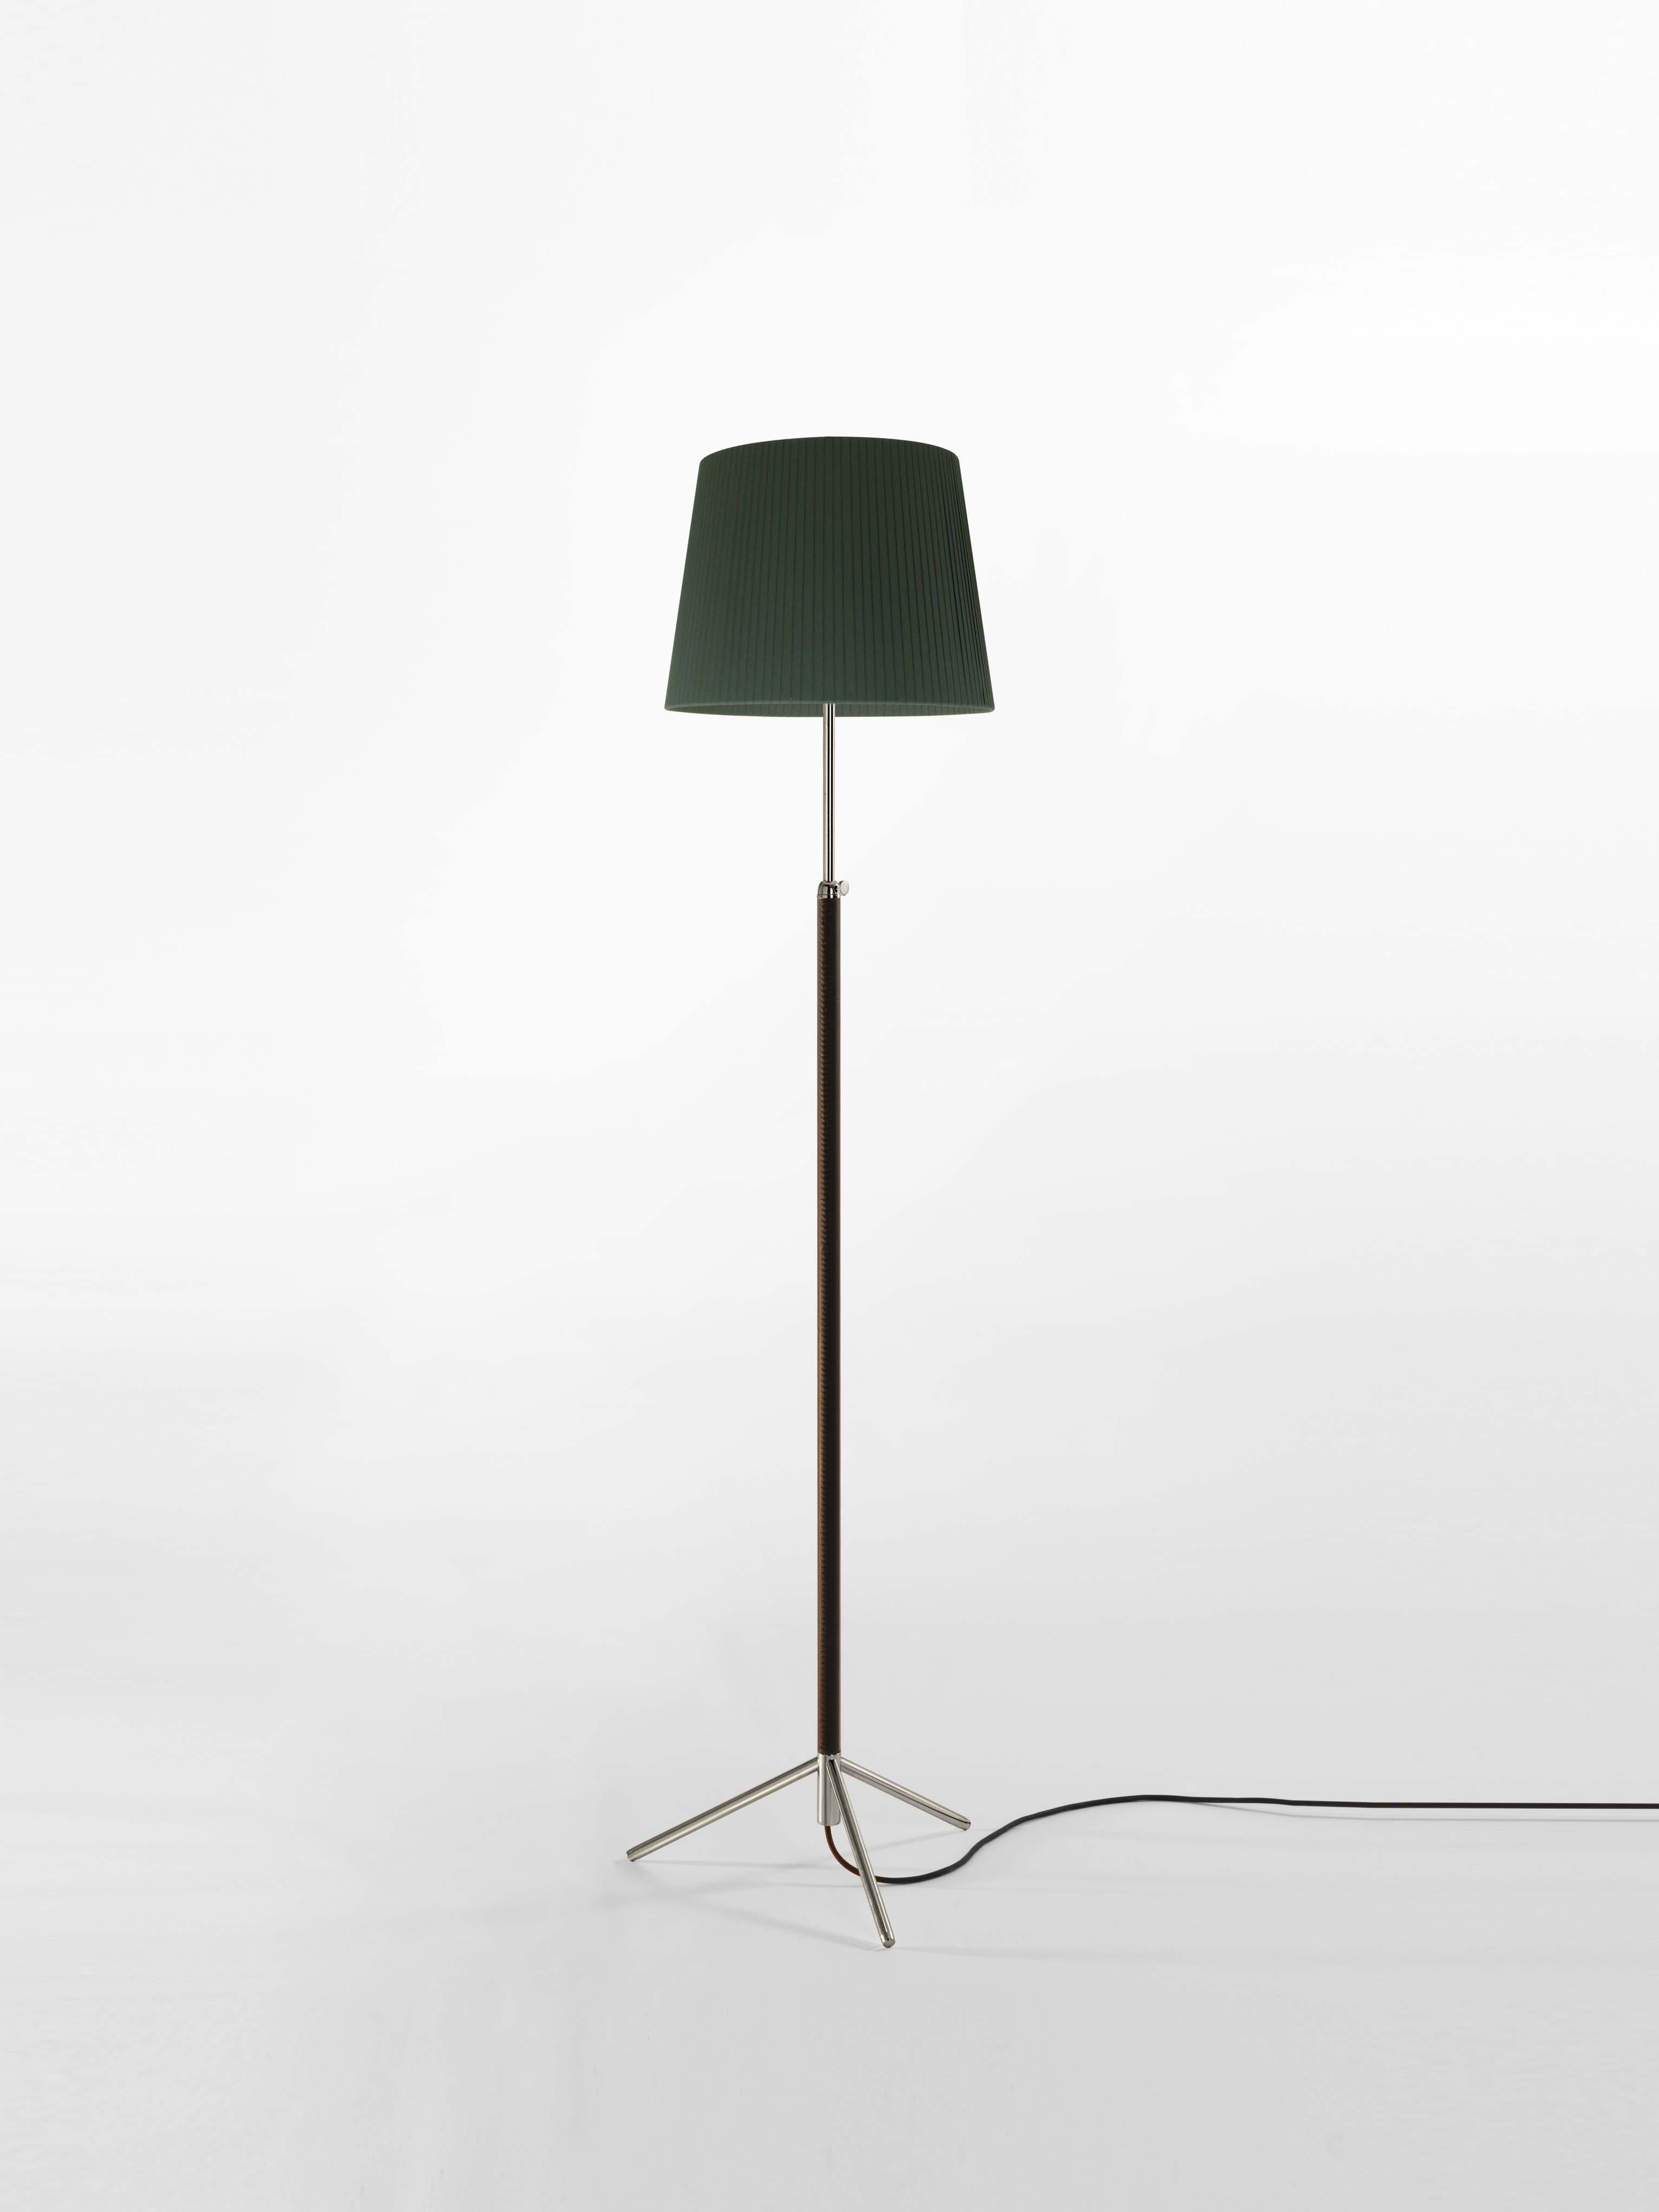 Green and chrome Pie de Salón G3 floor lamp by Jaume Sans
Dimensions: D 40 x H 120-160 cm
Materials: Metal, leather, ribbon.
Available in chrome-plated or polished brass structure.
Available in other shade colors and sizes.

This slender